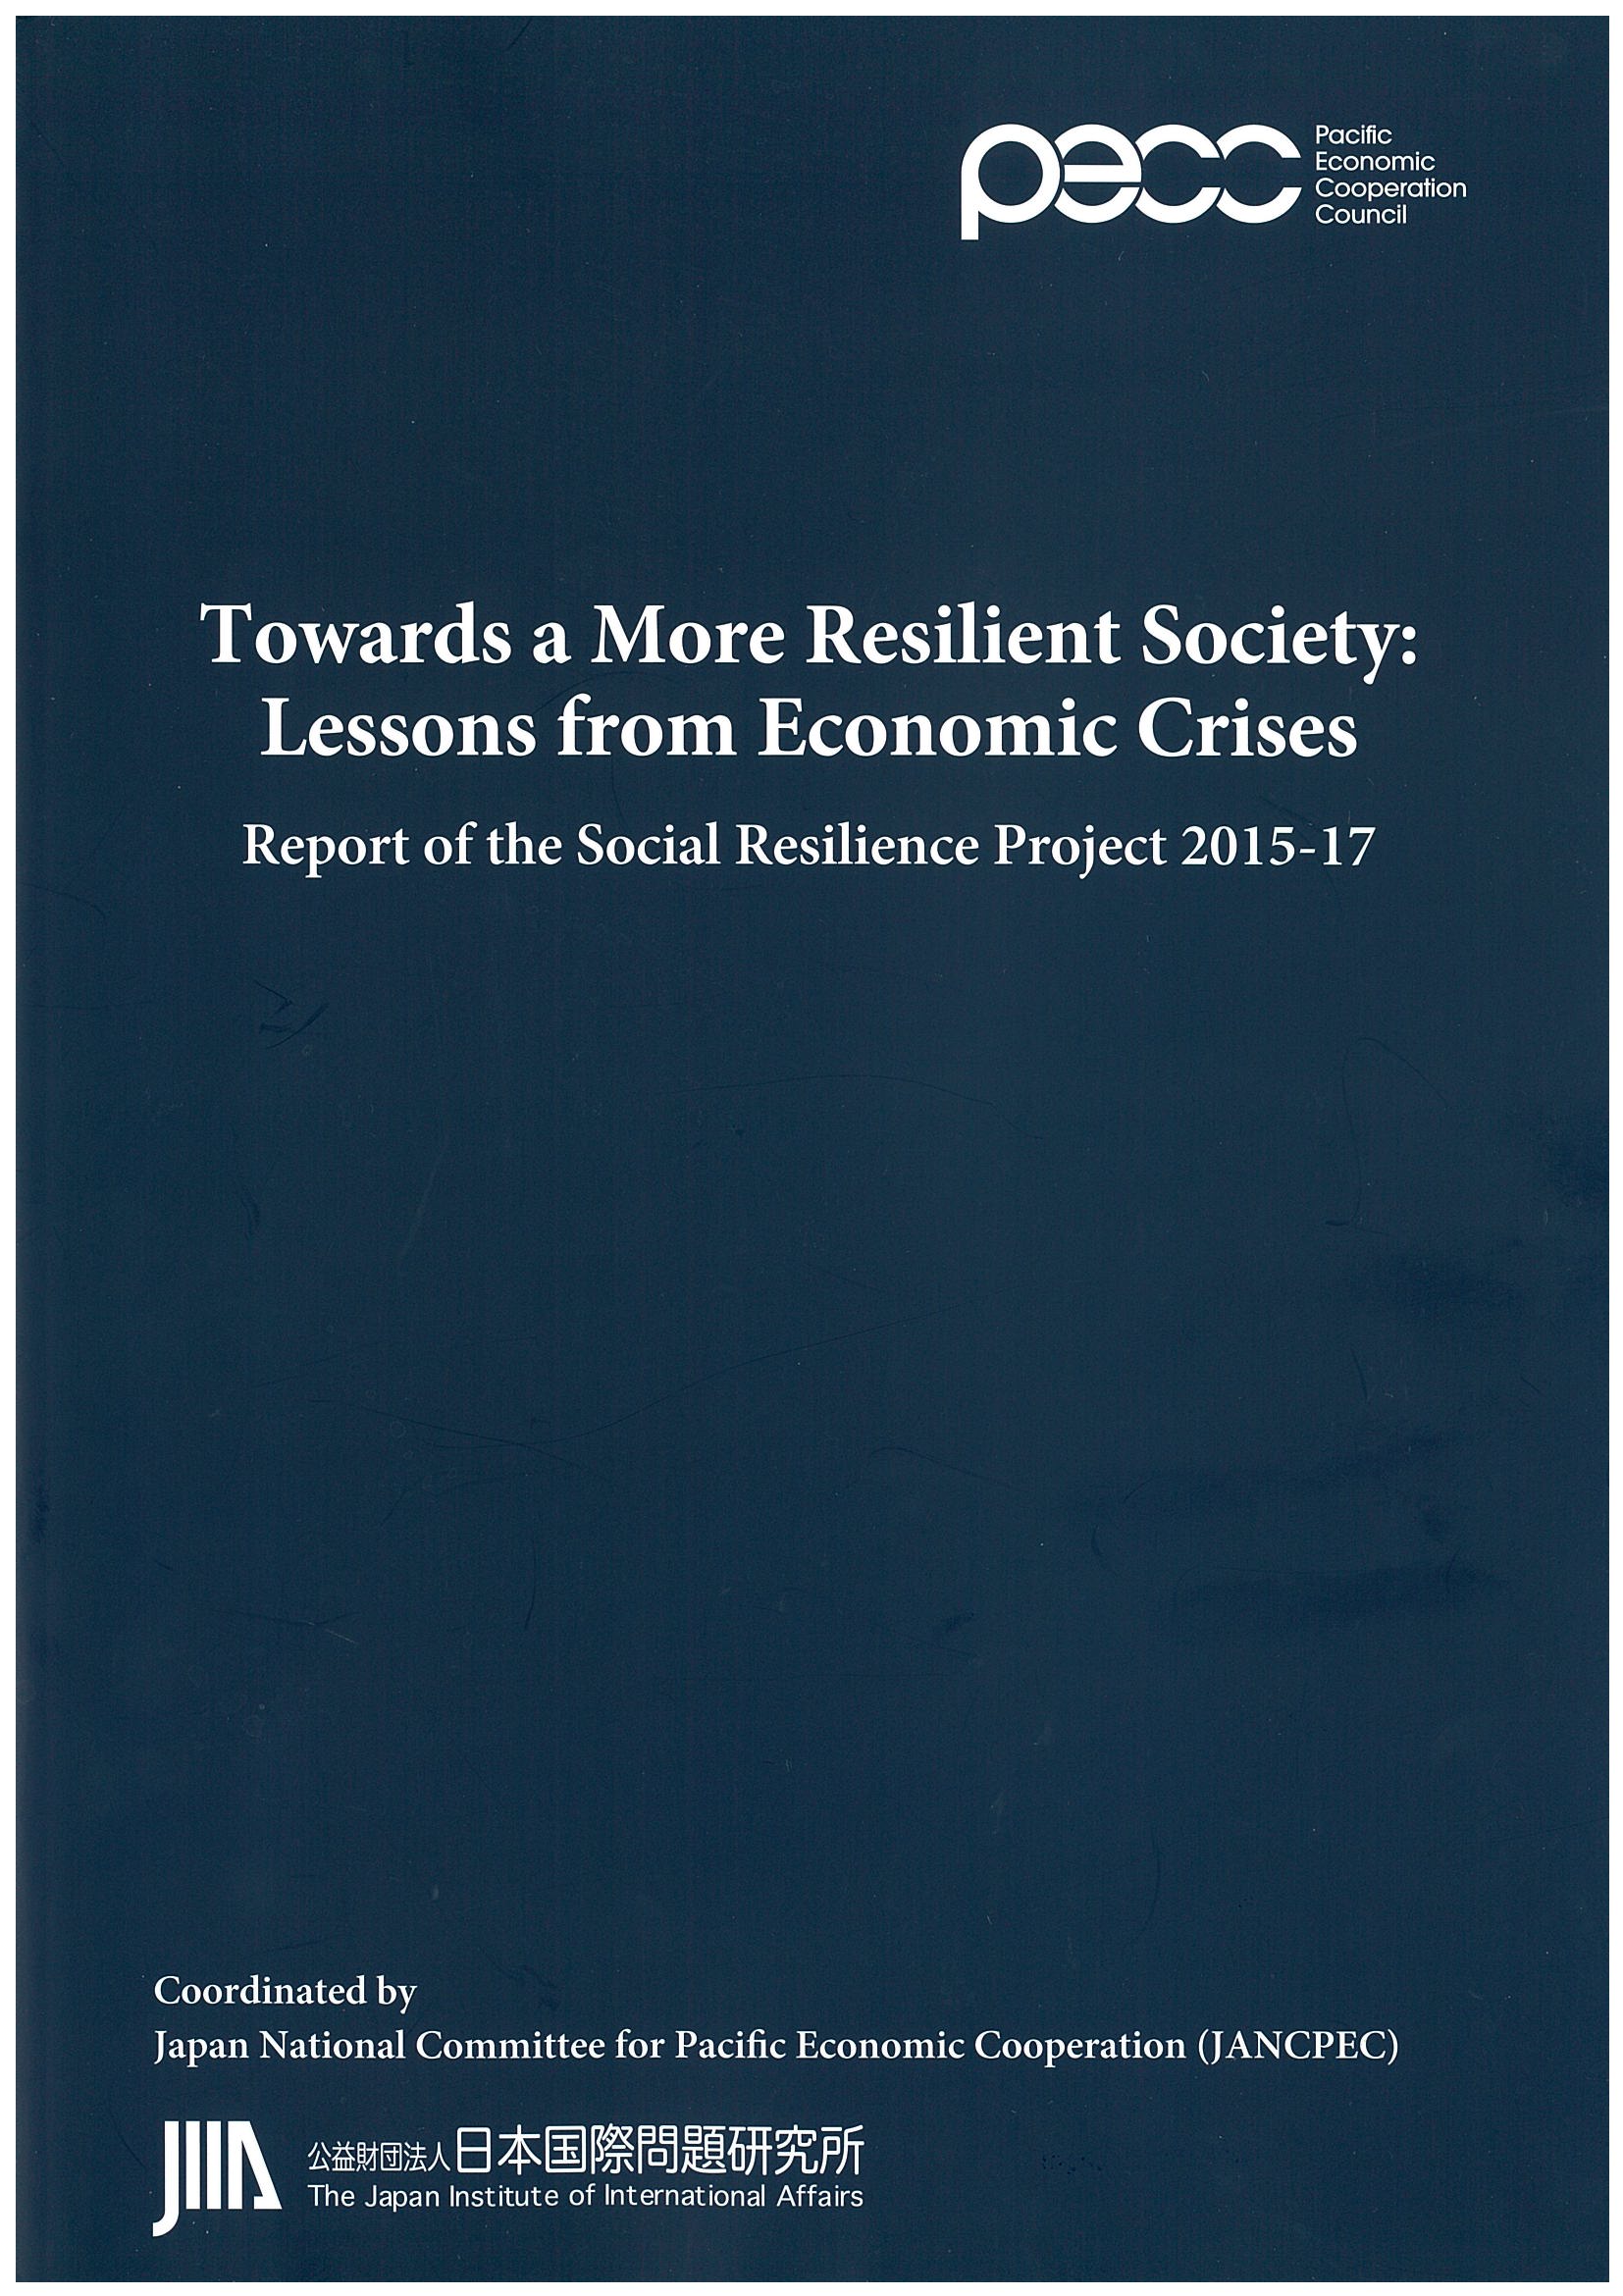 Social Resilience 2015 17 cover